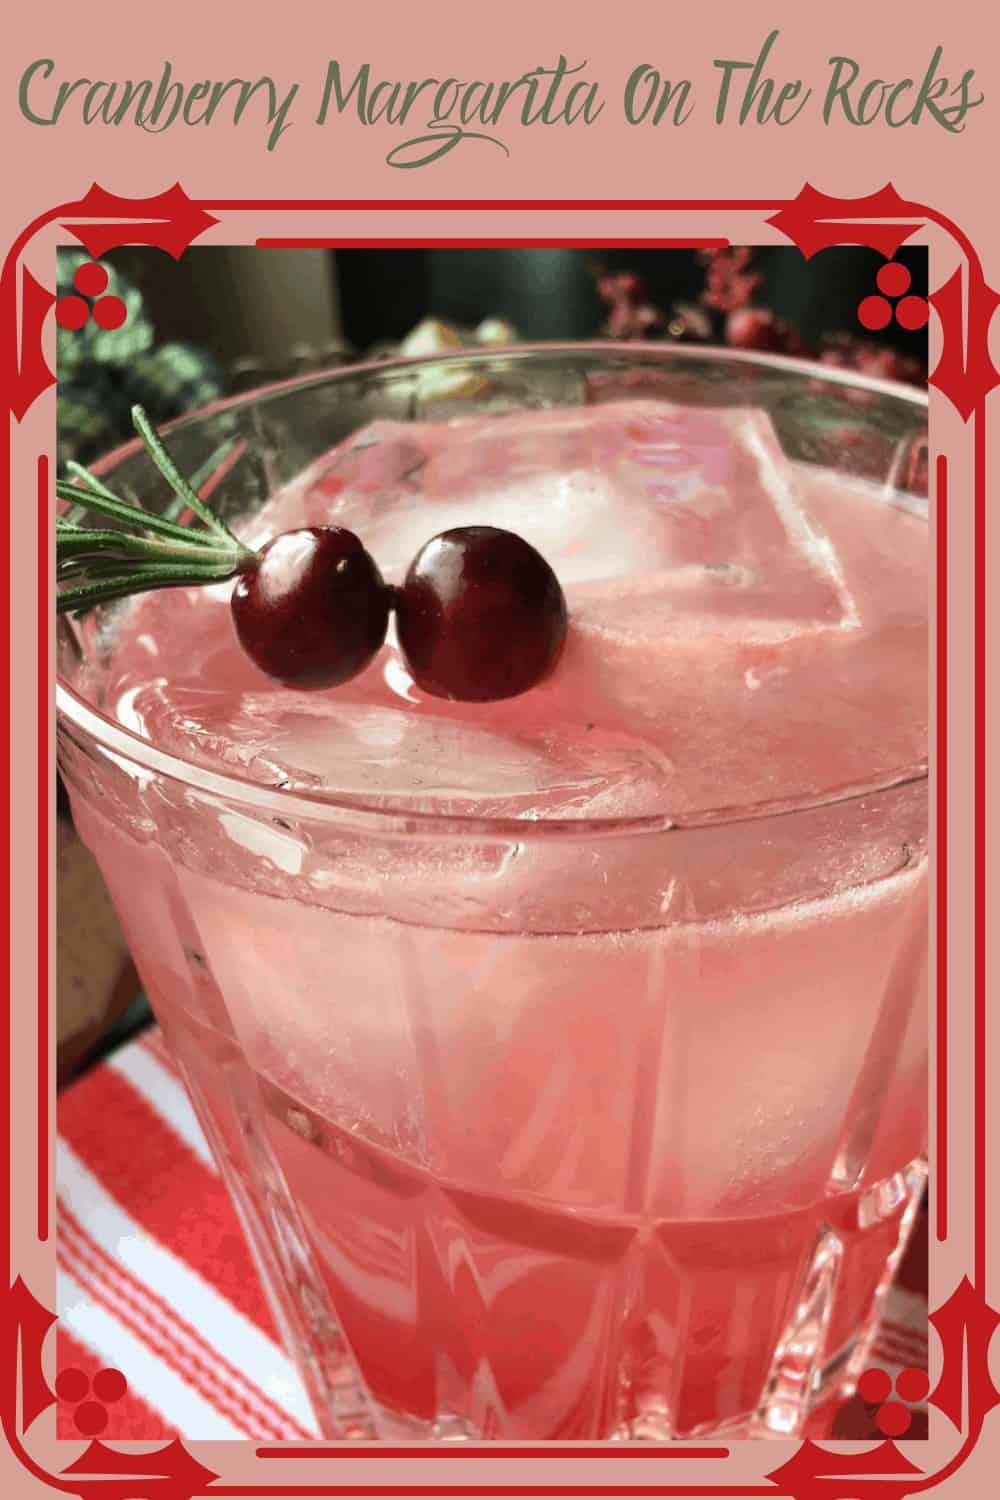 2 cranberries on Rosemary sprig